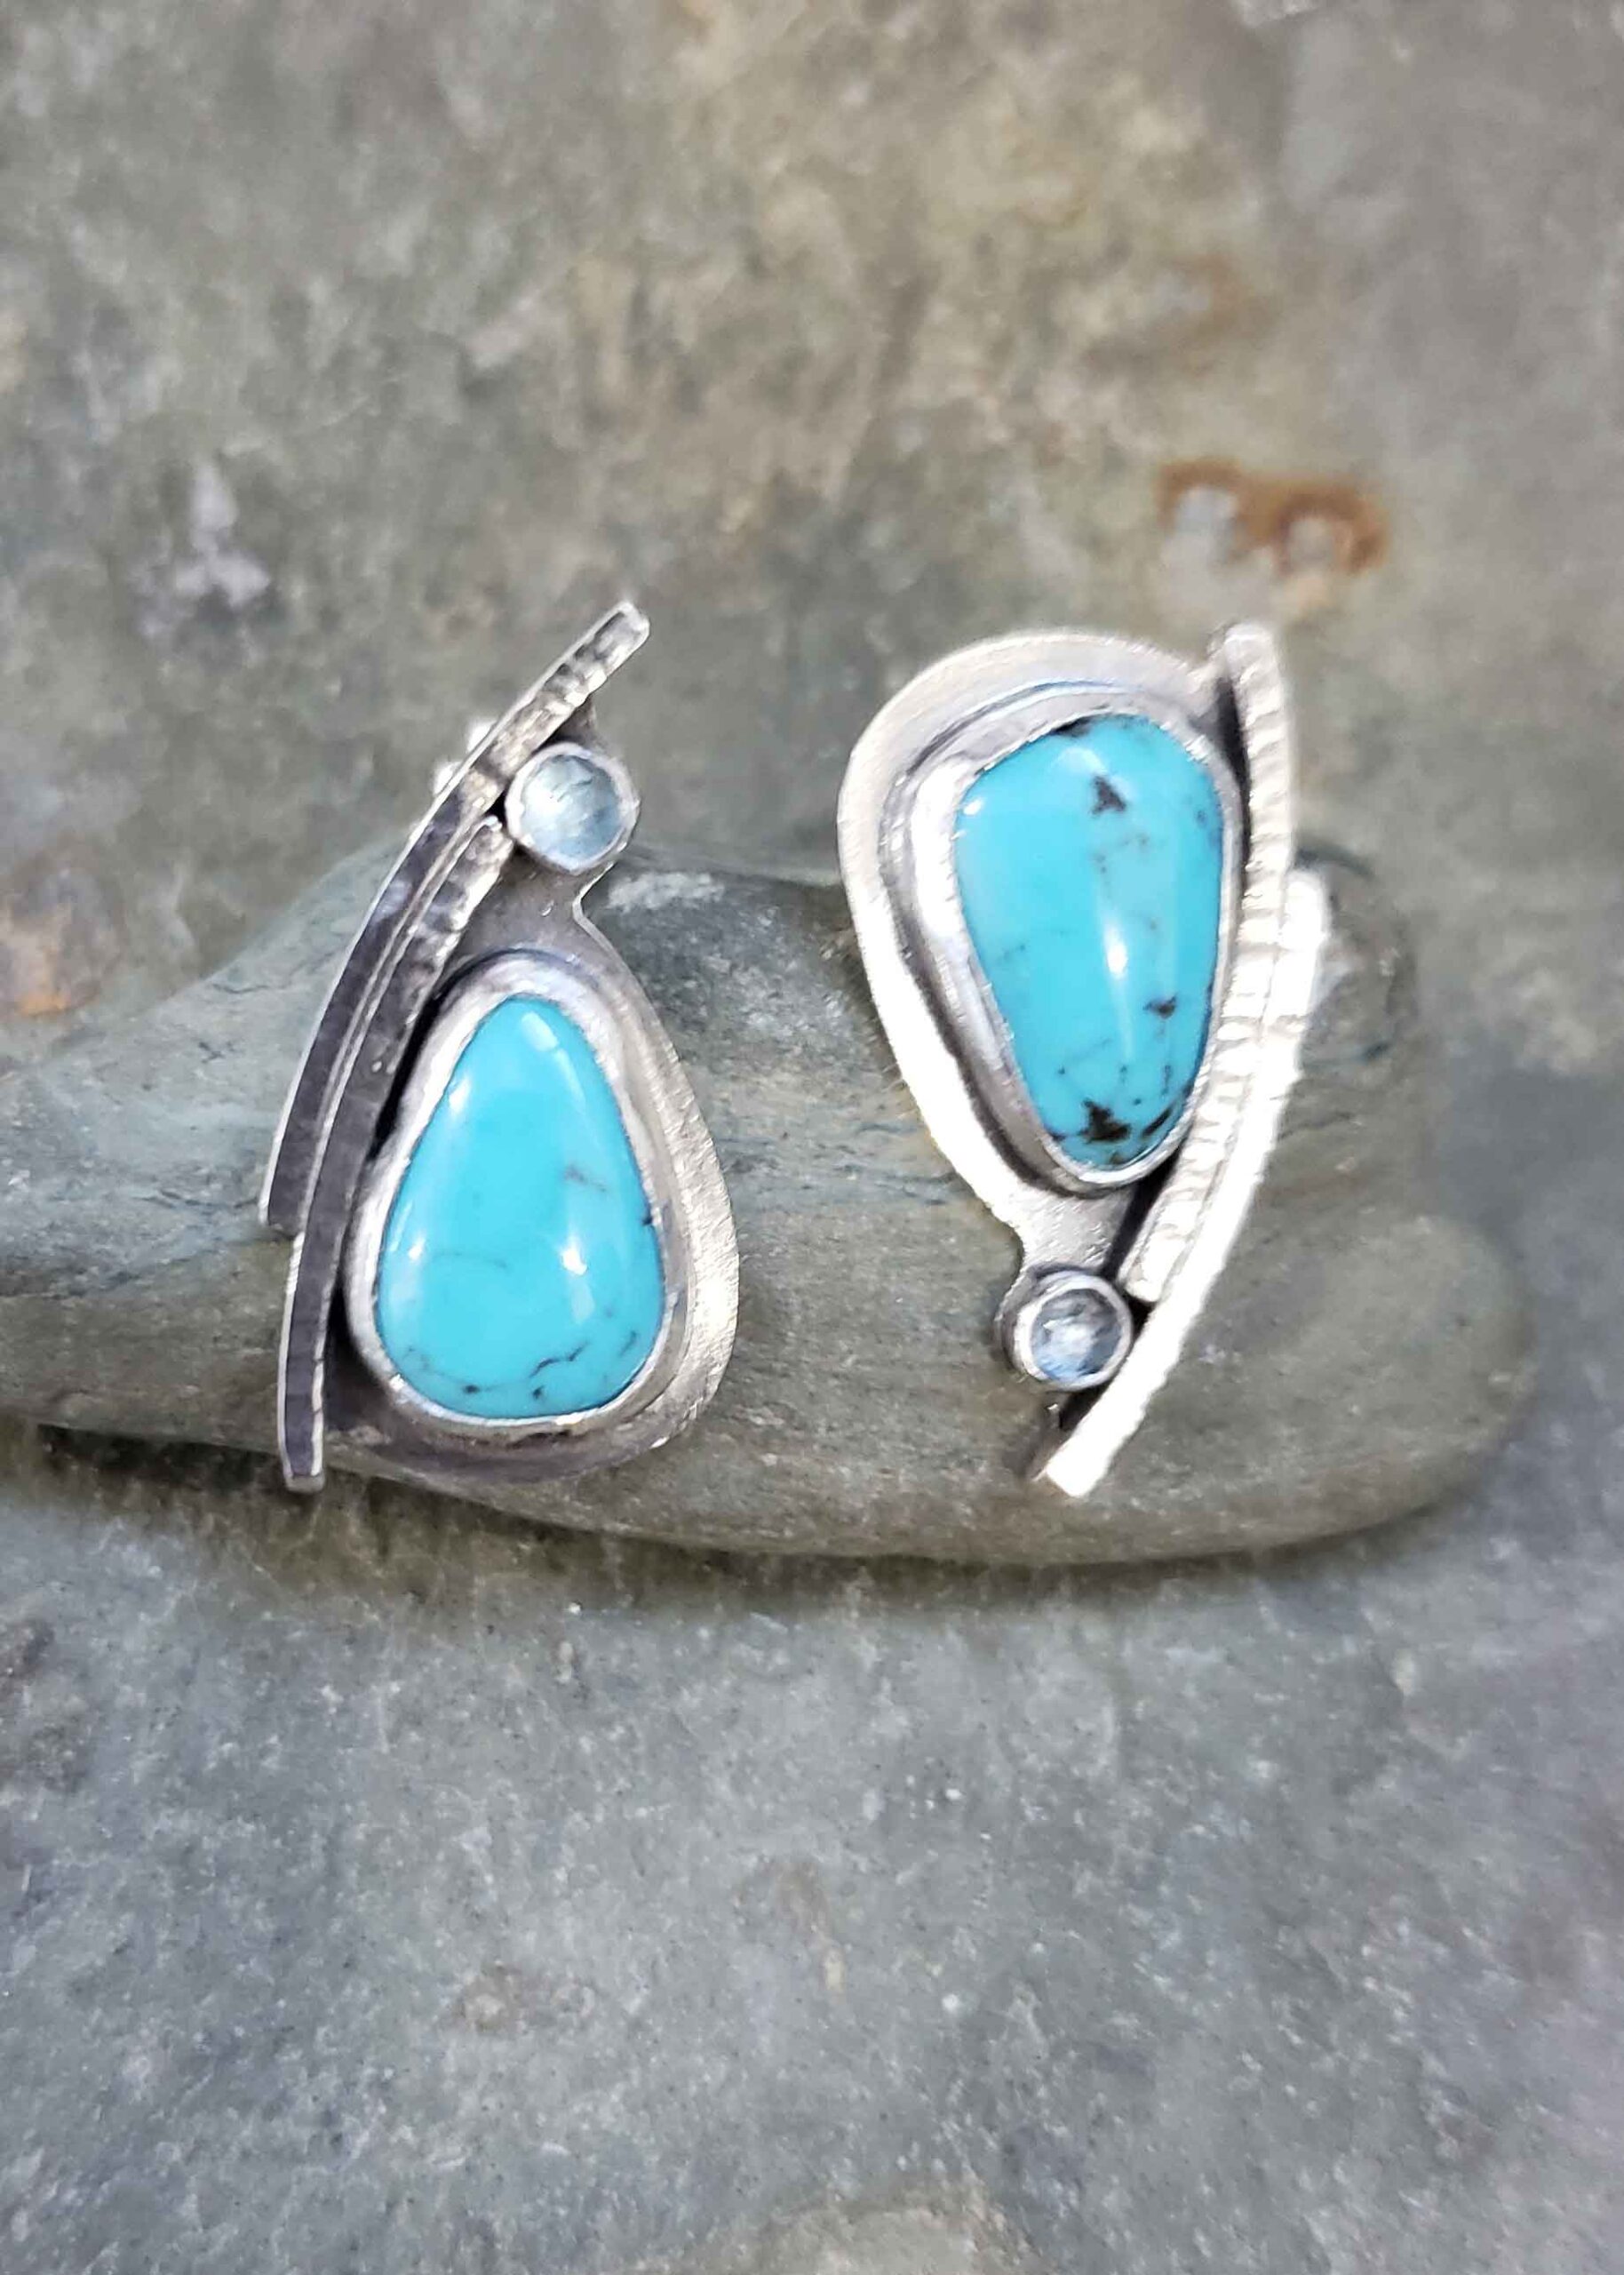 Turquoise and blue topaz silver post earrings by Dona Miller.